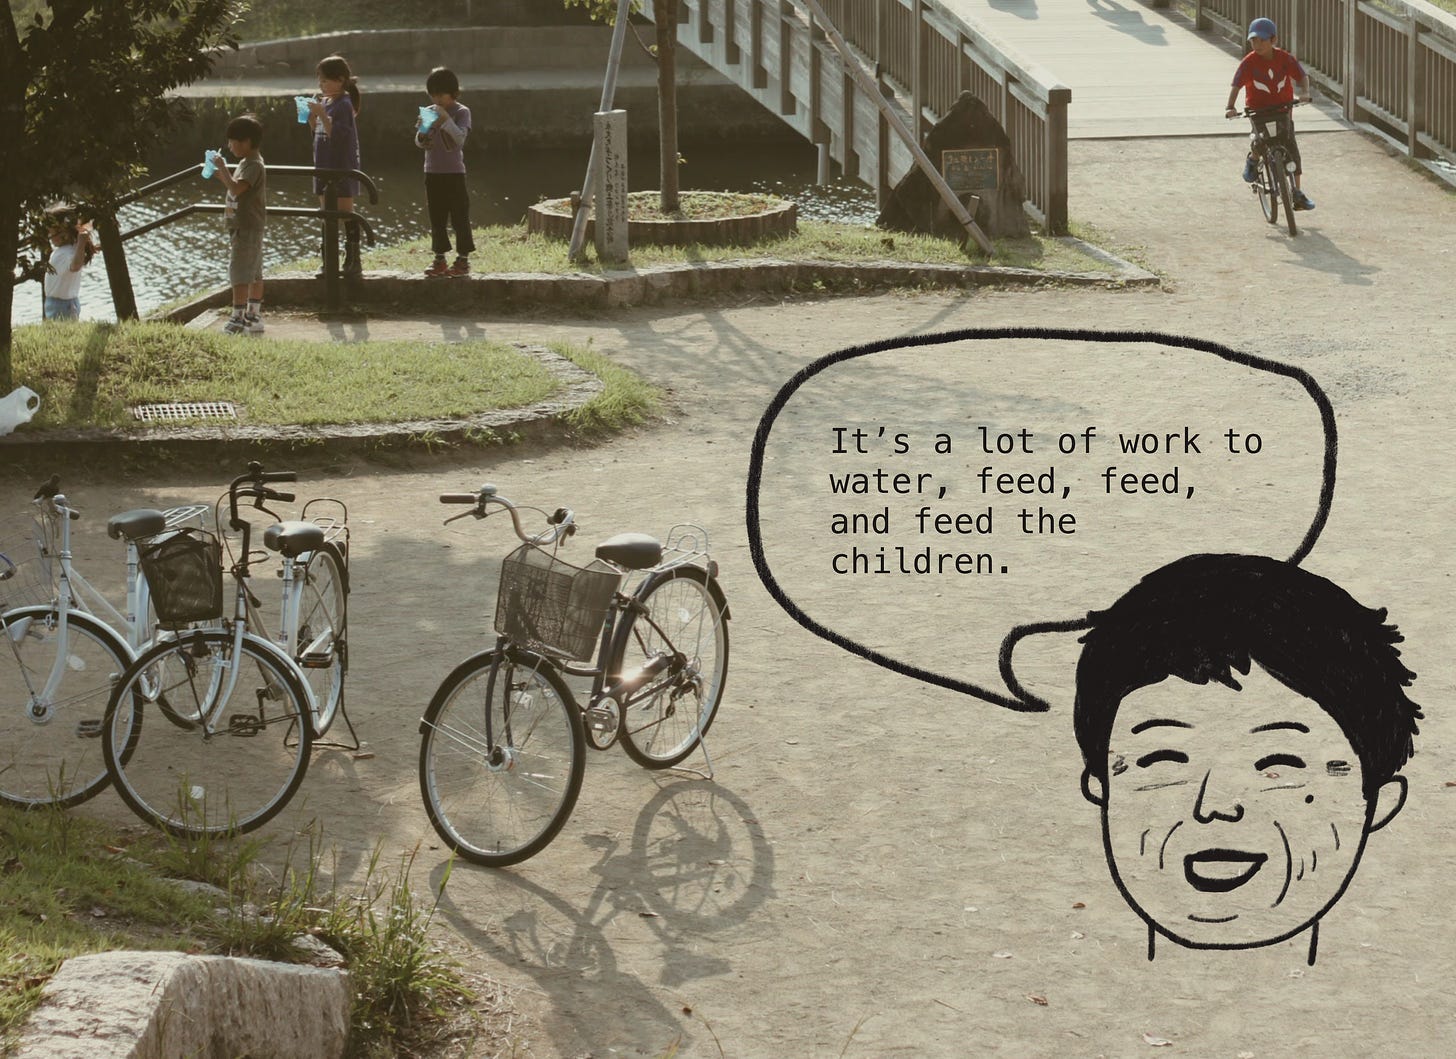 Photo of bicycles and kids standing by a river. Illustrated sketch of a Japanese grandma with a speech bubble that says, "It's a lot of work to water, feed, feed, and feed the children."